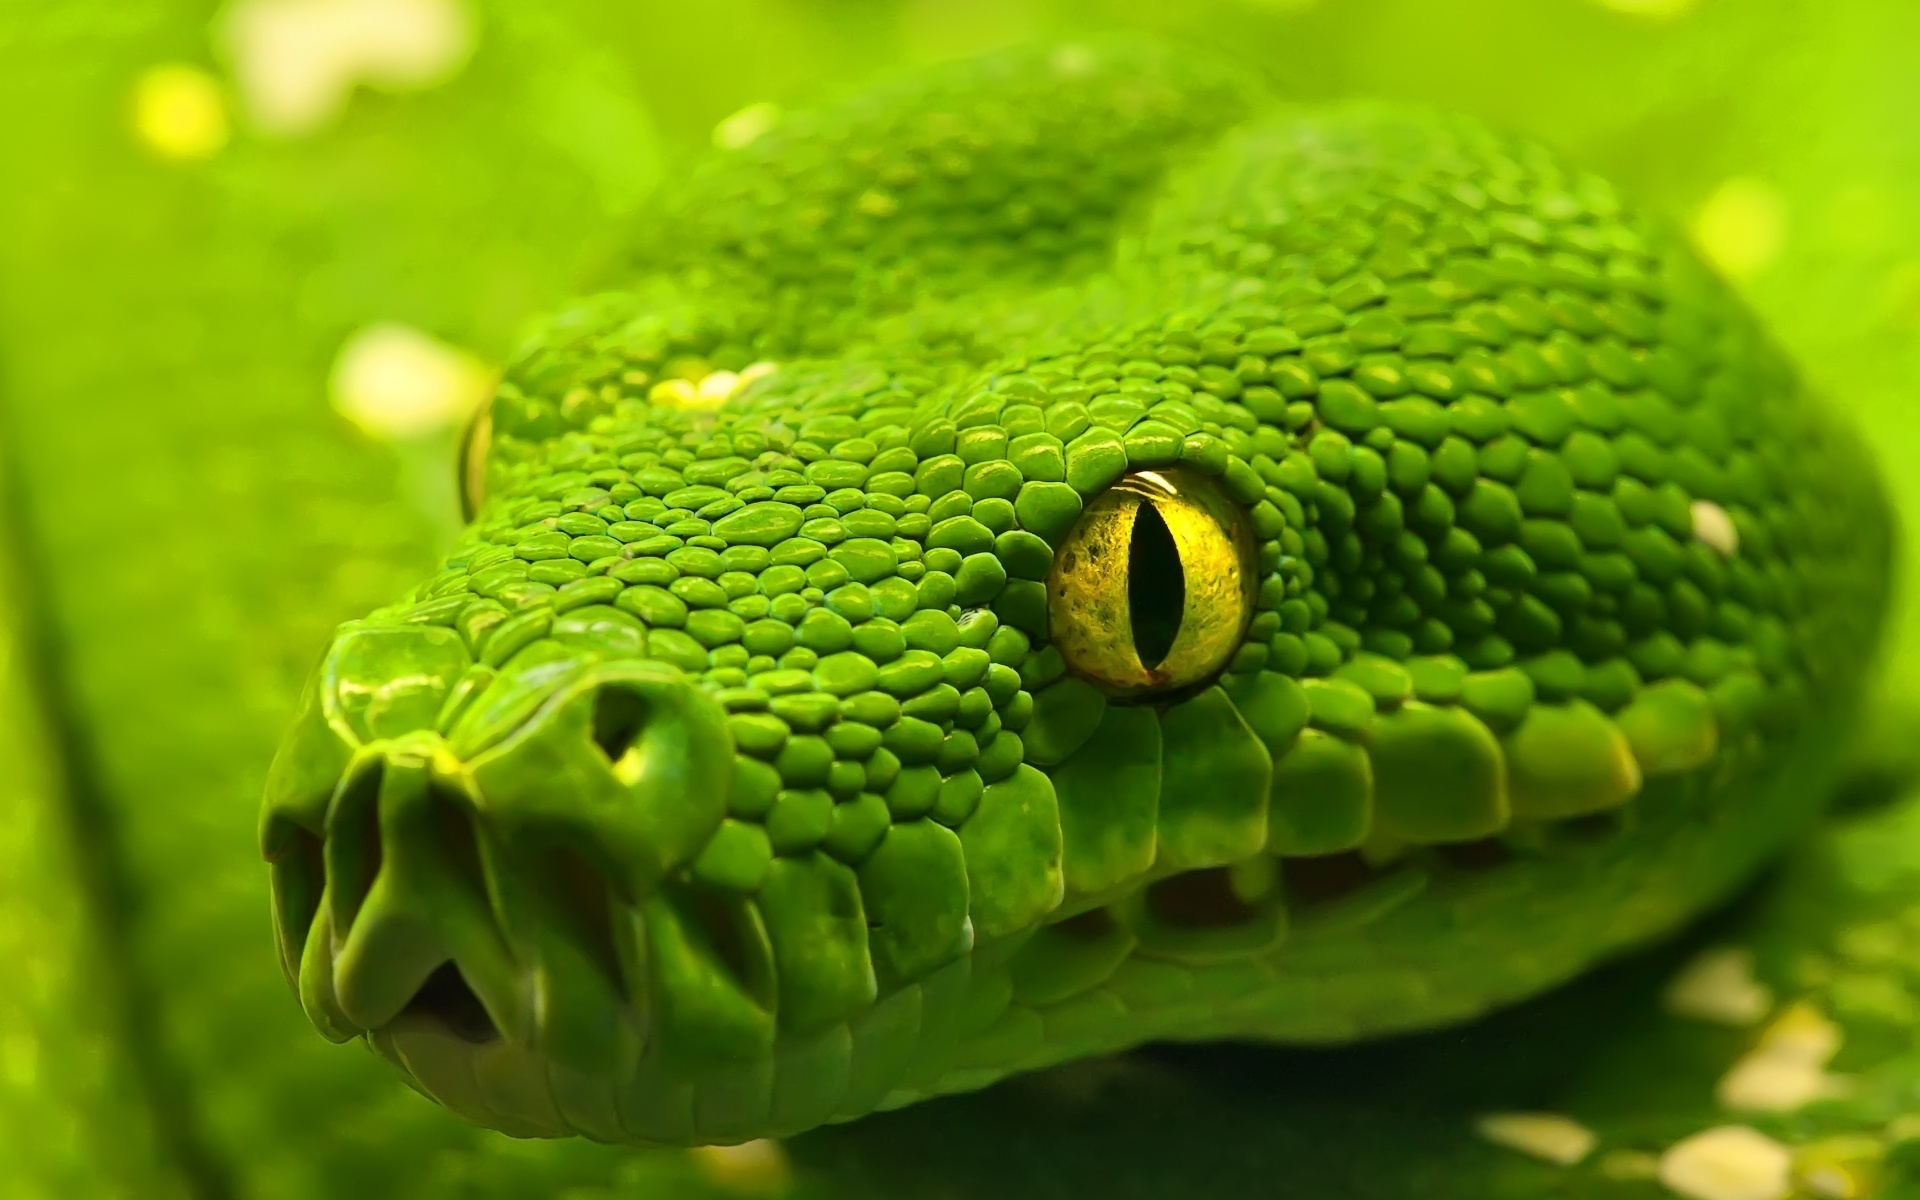 Snakes: The Neuroscience Behind the Psychopath at Work » snake 